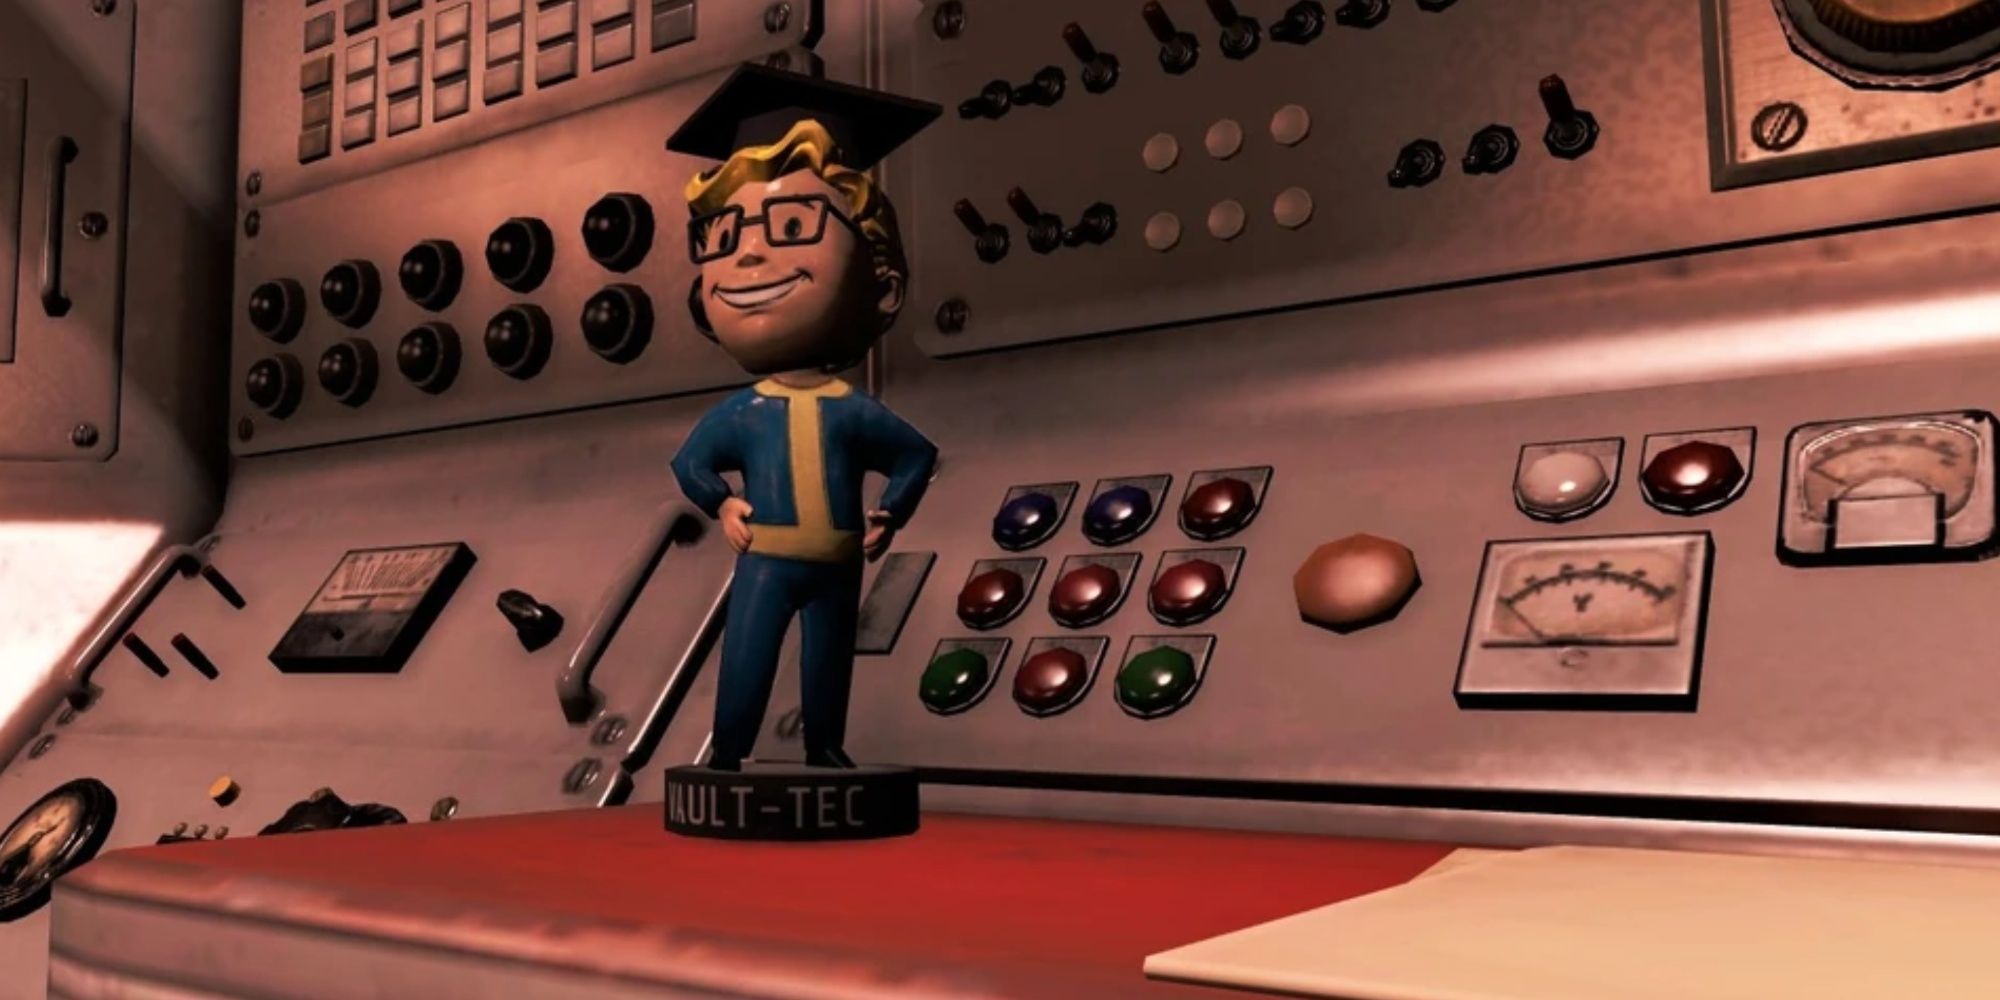 The Intelligence Bobblehead in Fallout 4, a Vault-Boy mascot with a graduation cap. It's sitting on a control panel.